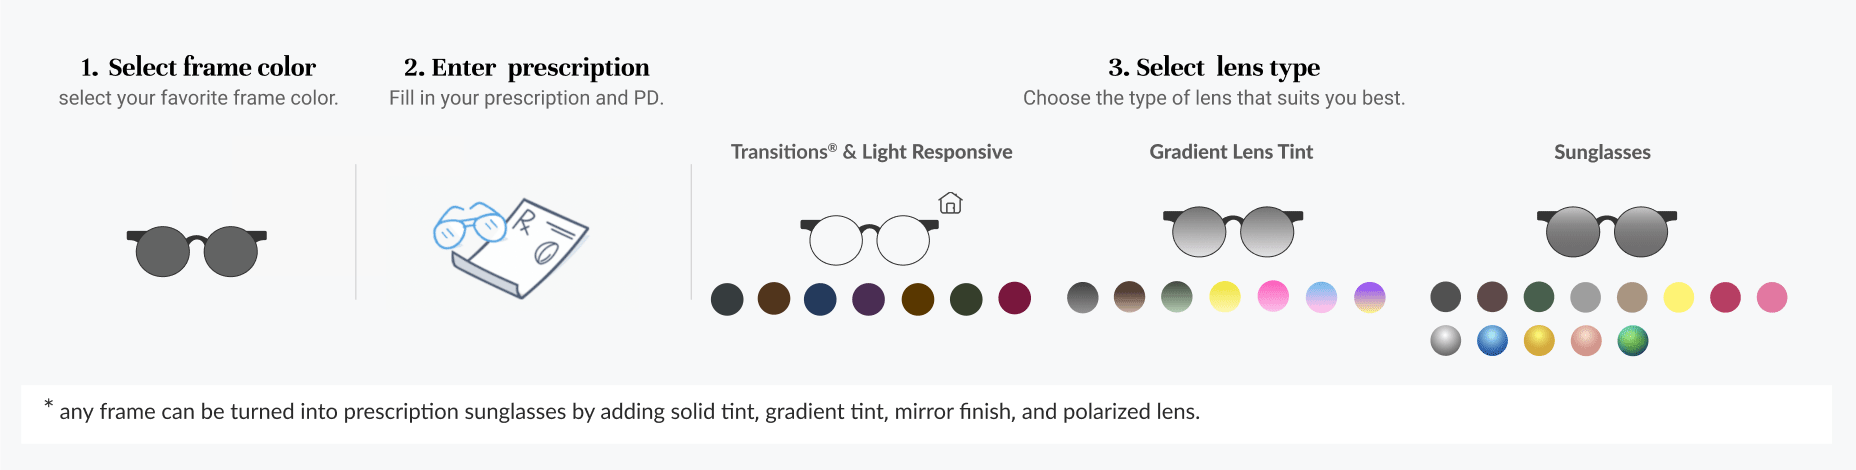 How to Order Sunglasses